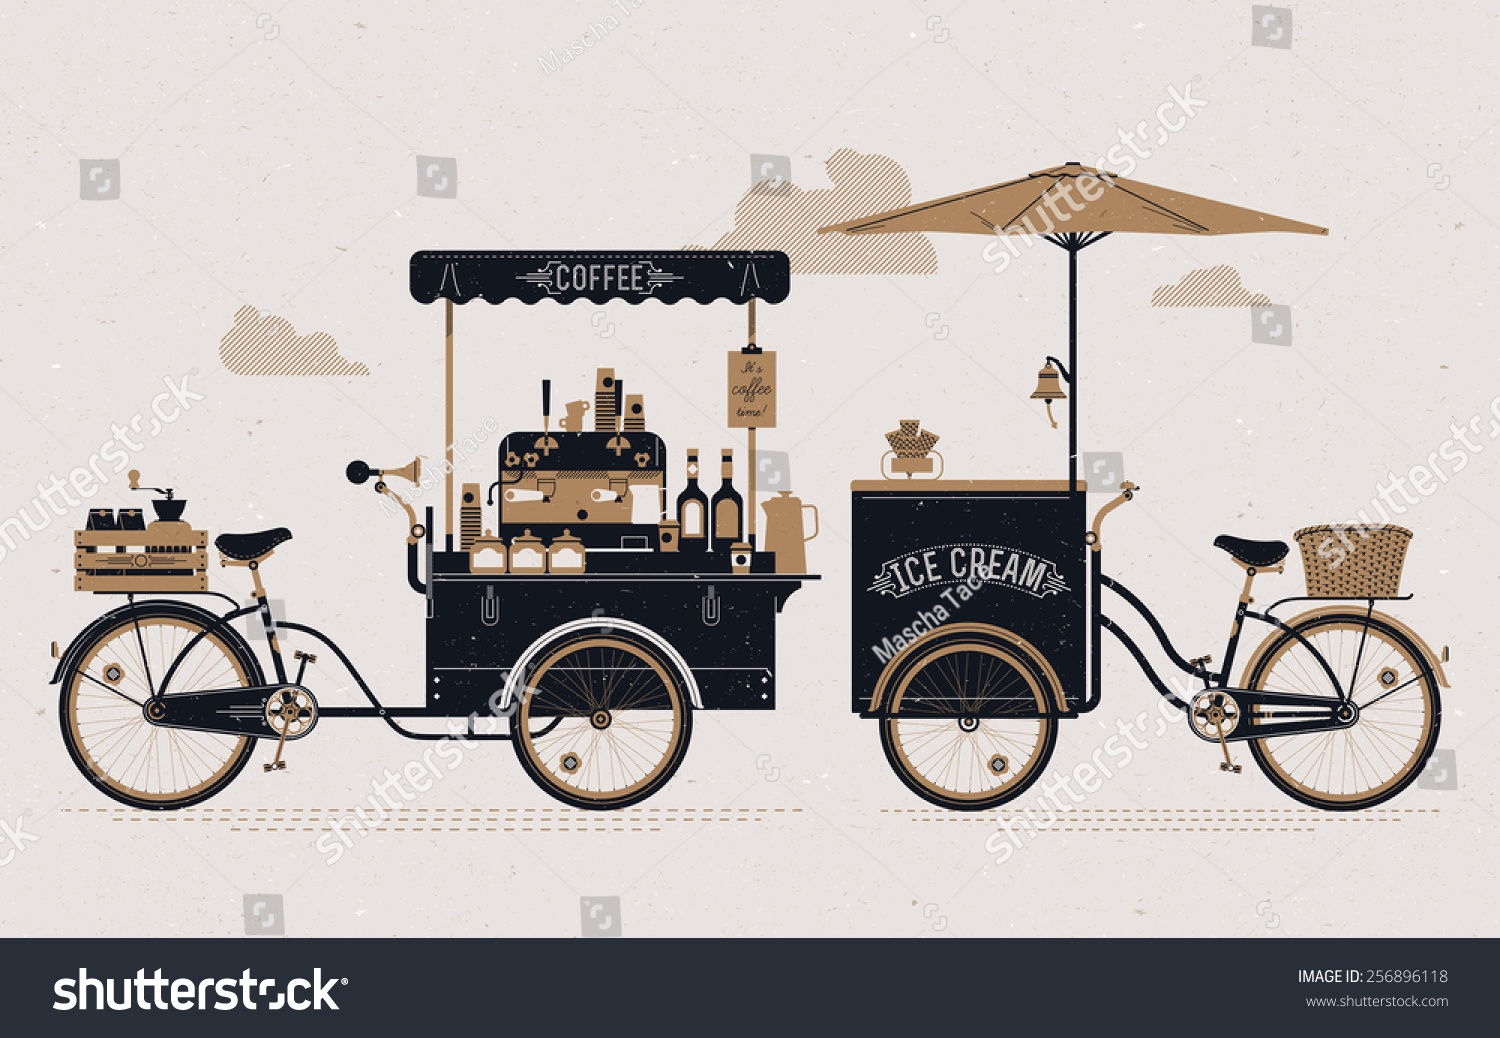 SVG of Creative detailed vector street coffee and ice cream vending bicycle carts  with espresso machine, sirup bottles, wooden crate on rear rack, disposable cups and more. Subtle rough paper texture svg